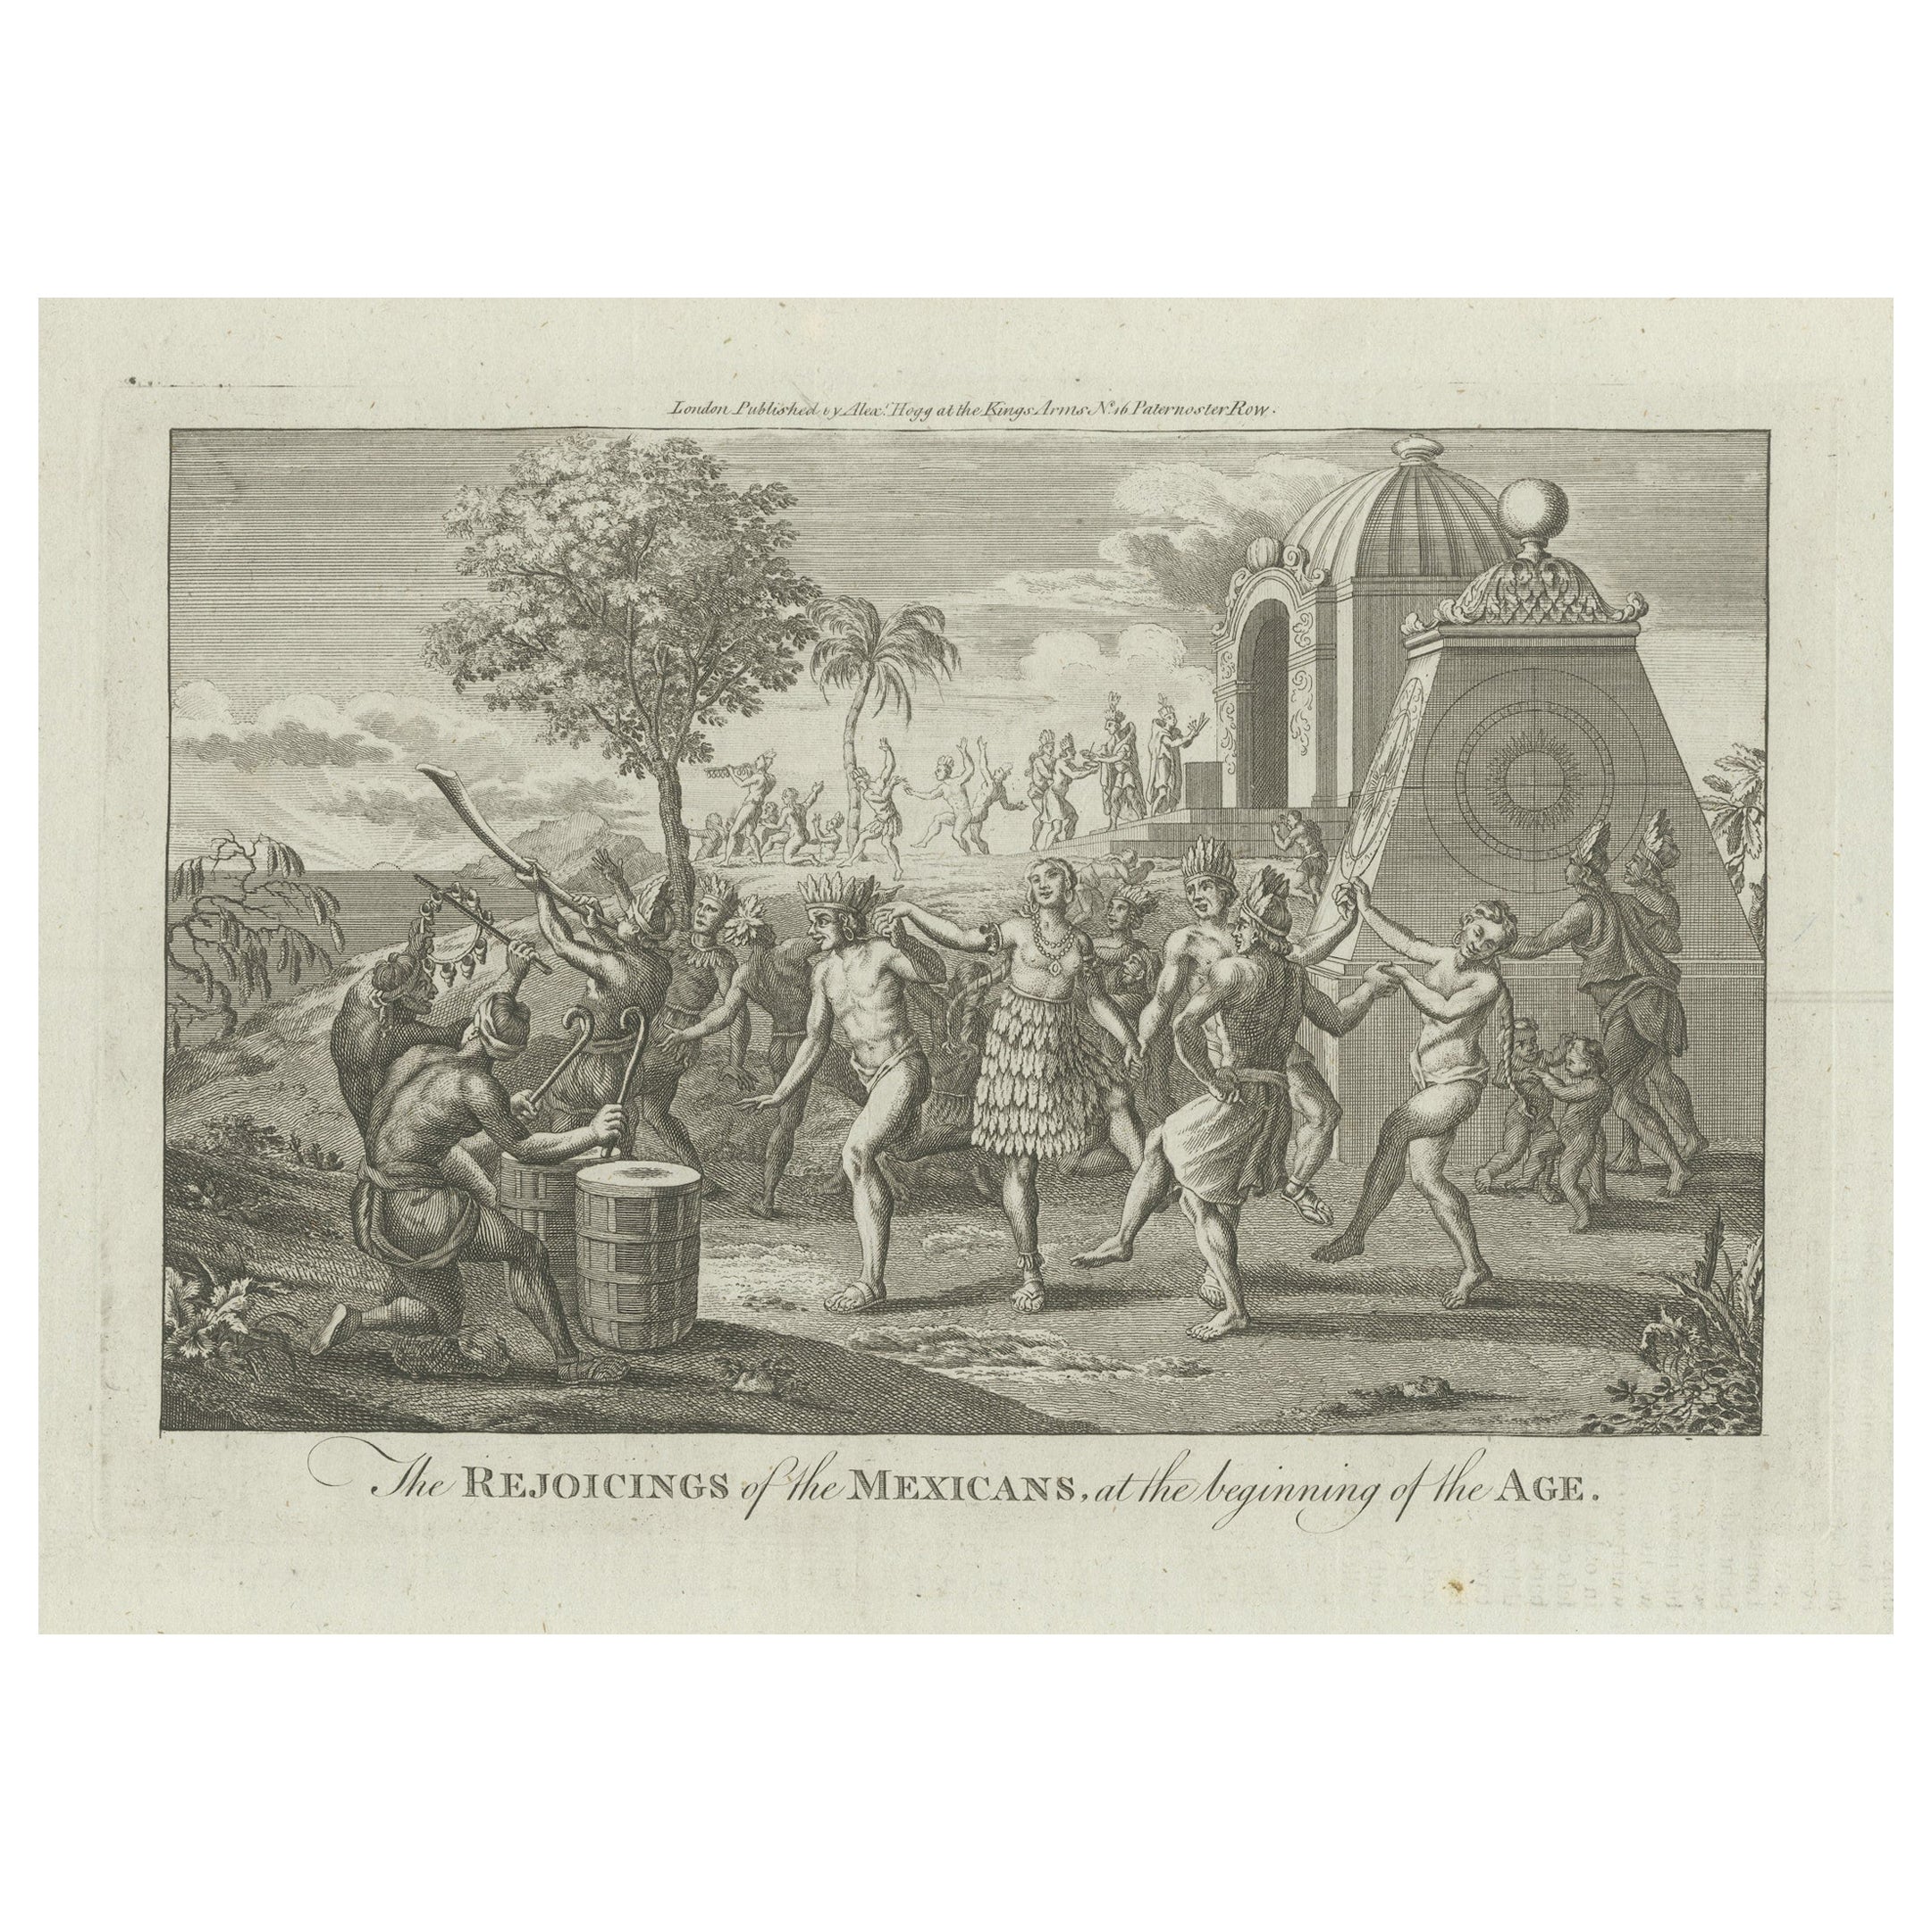 Celebration and Ritual: Engraving of Mexican Festivities in the Age of Discovery For Sale